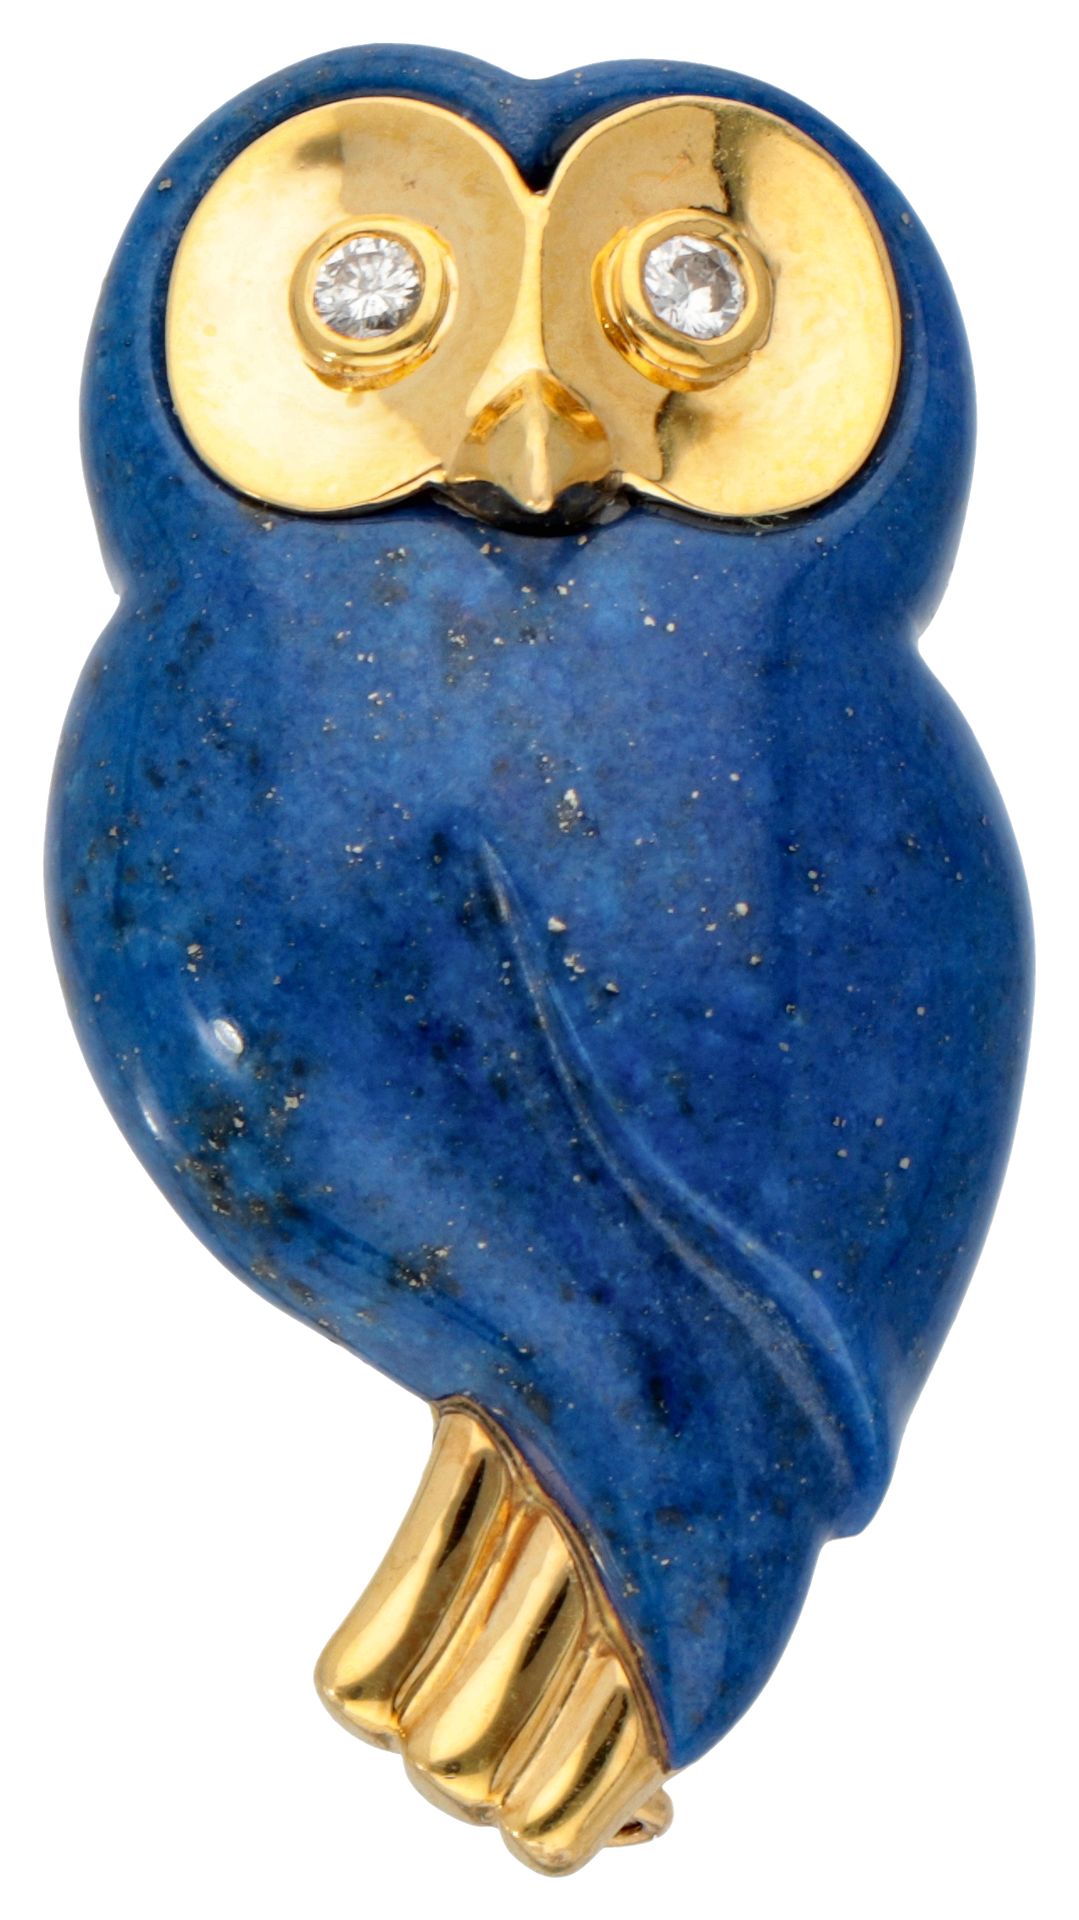 Lapis lazuli brooch with 18K. Yellow gold details depicting an owl. Con doble br&hellip;